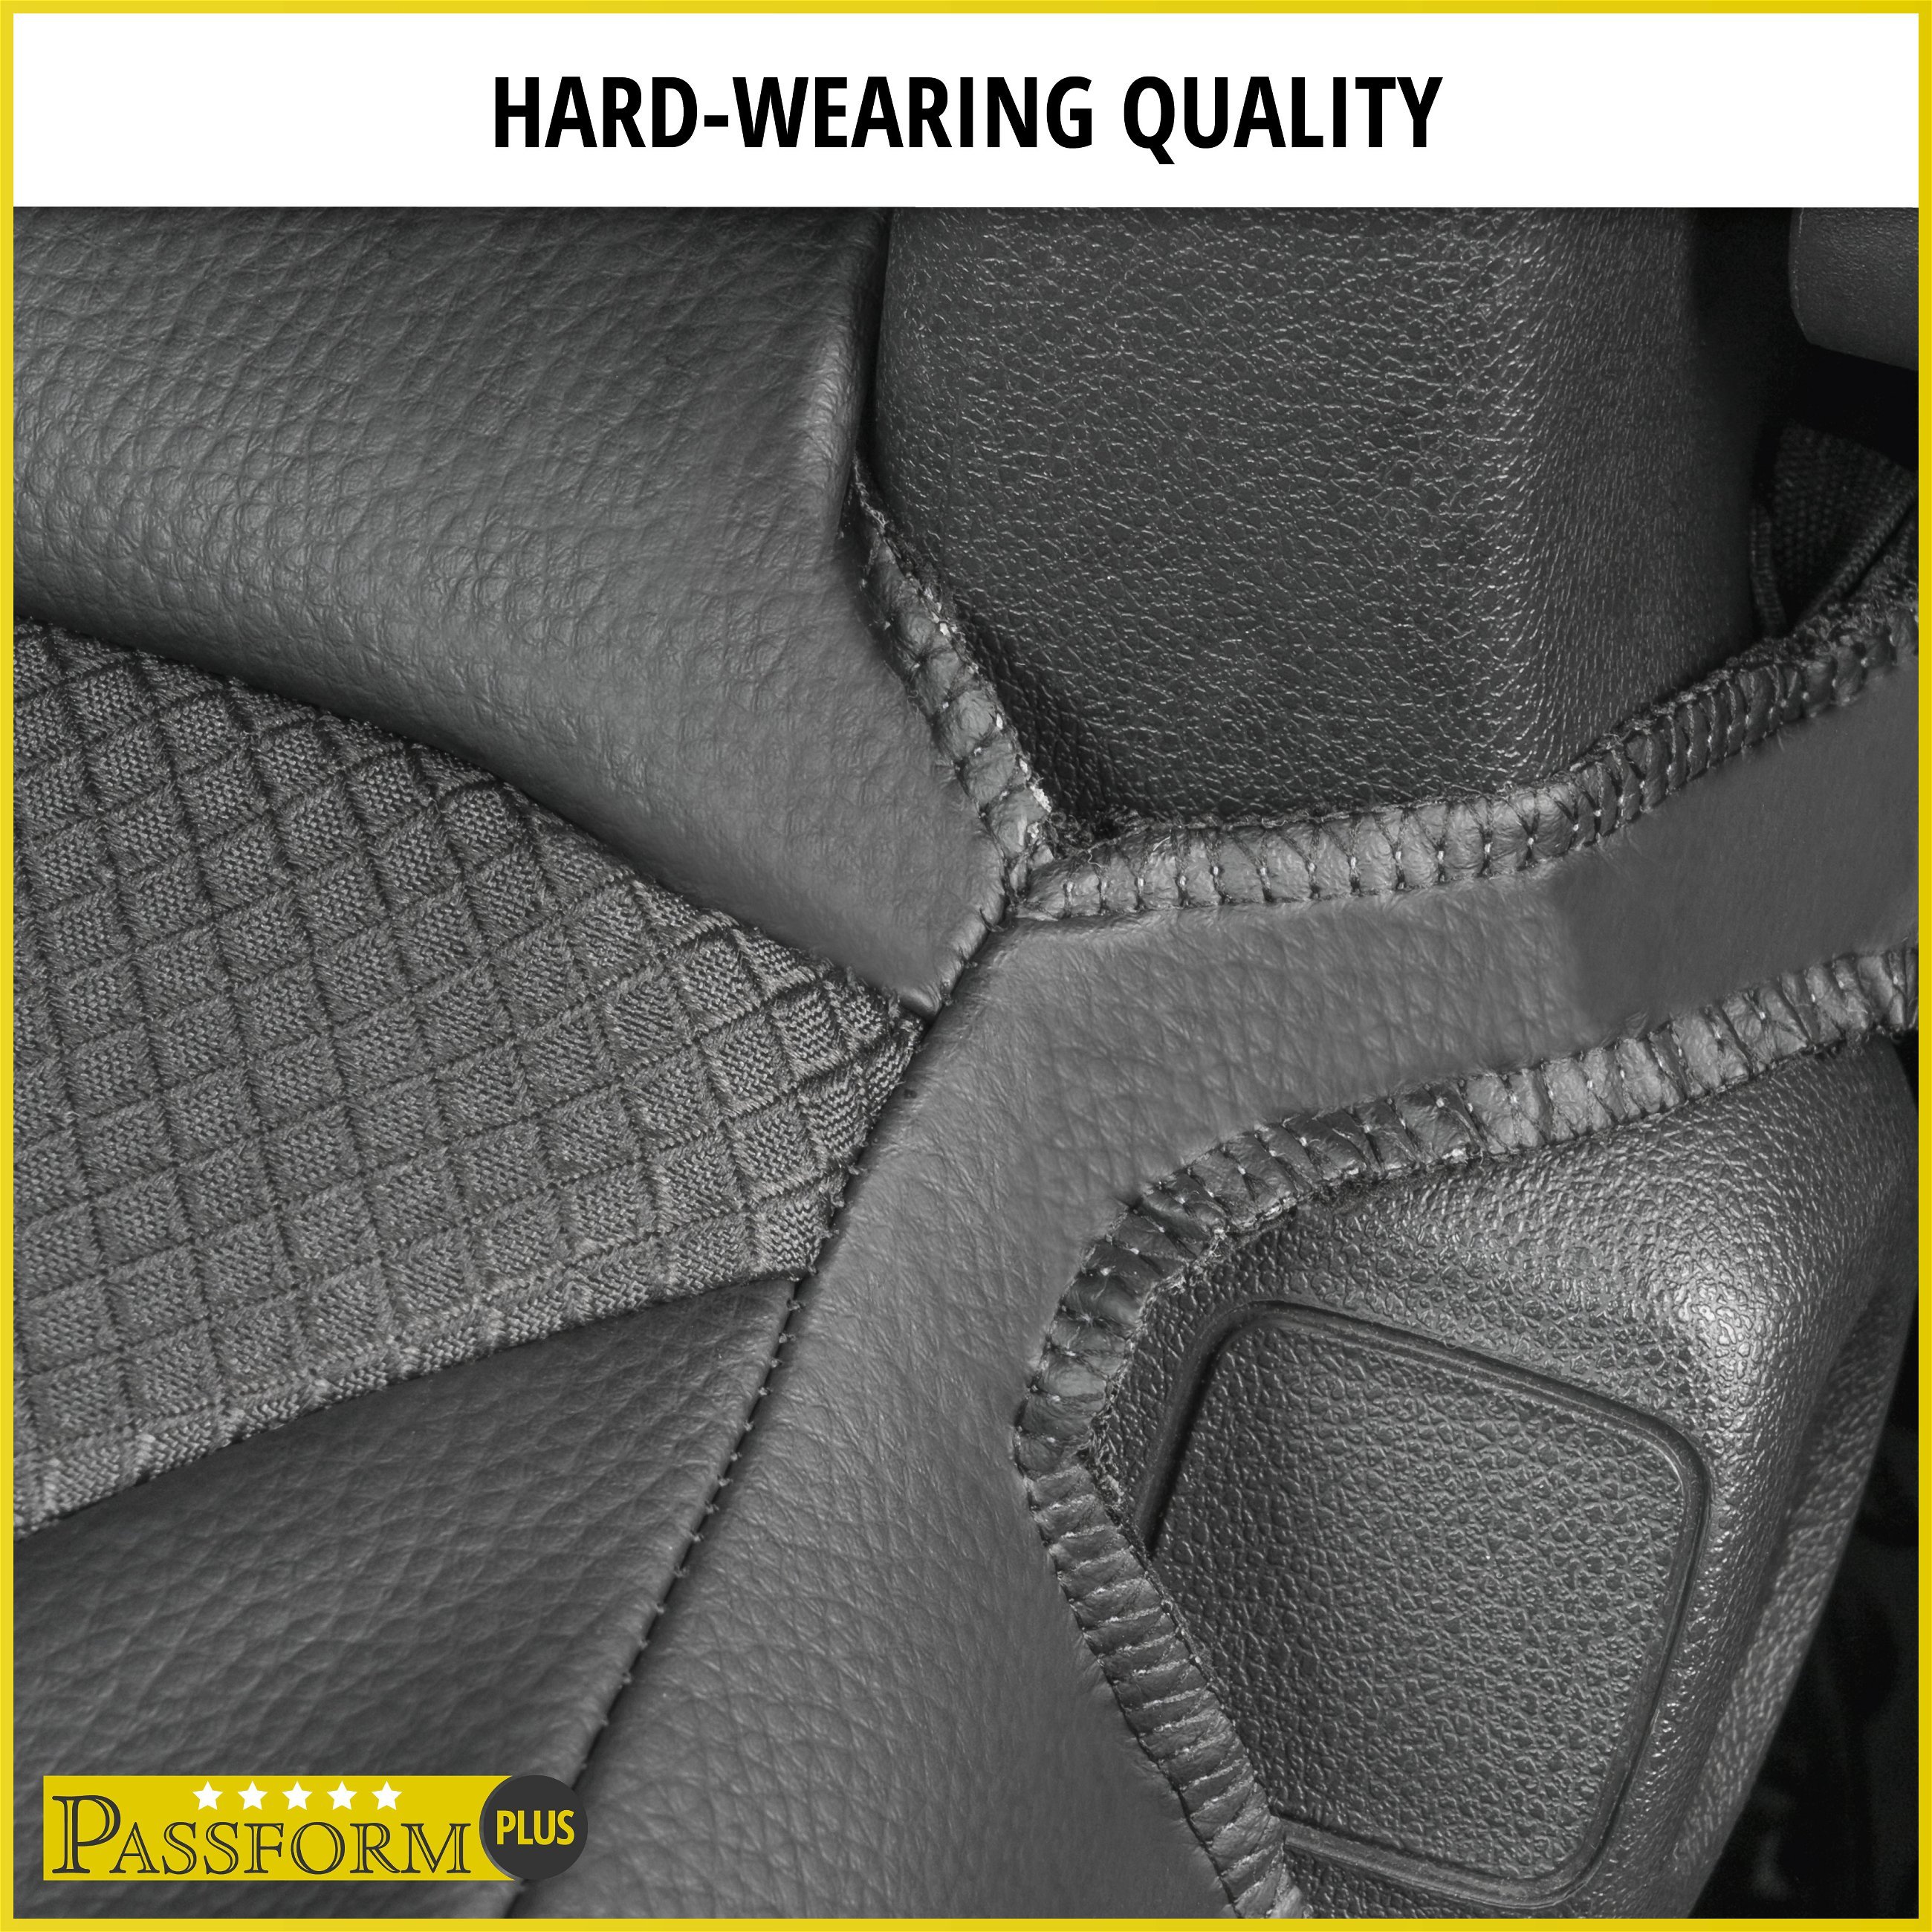 Premium Seat Cover for Fiat Doblo 11/2000-Today, 2 single seat covers front